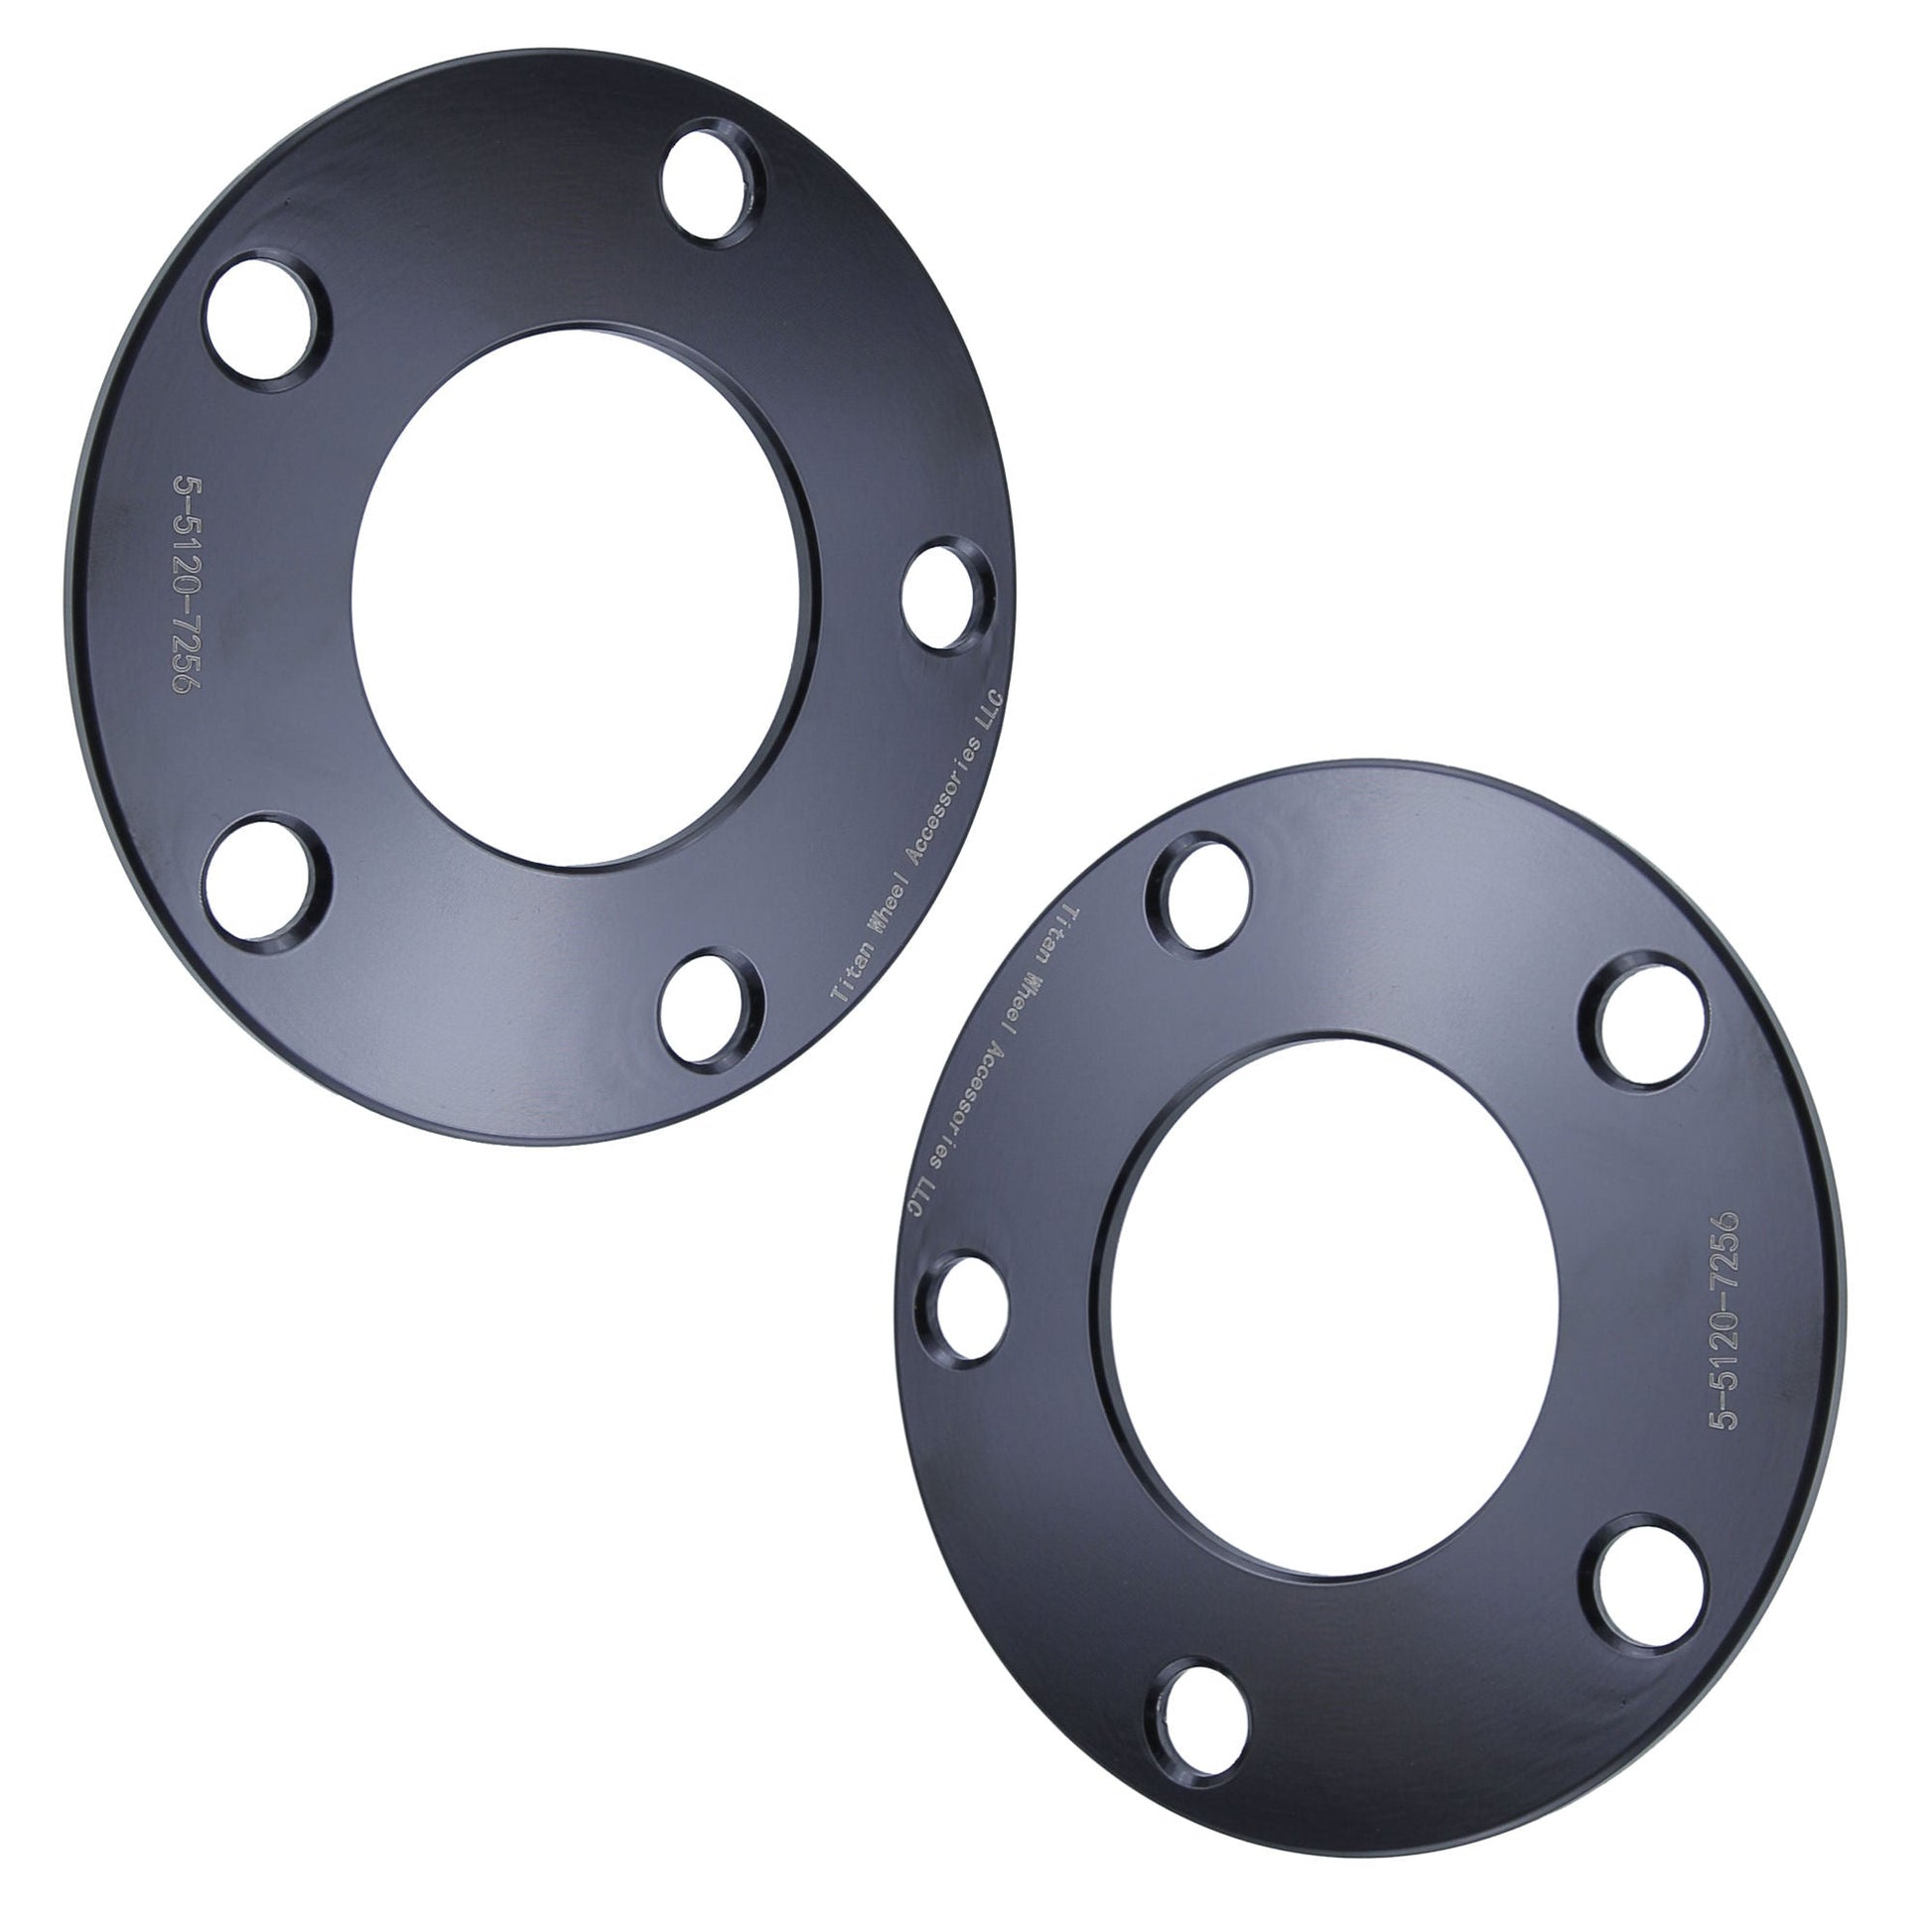 5mm Titan Wheel Spacers for BMW 1 3 5 6 7 Series | 5x120 | 72.56 Hubcentric | Set of 4 | Titan Wheel Accessories